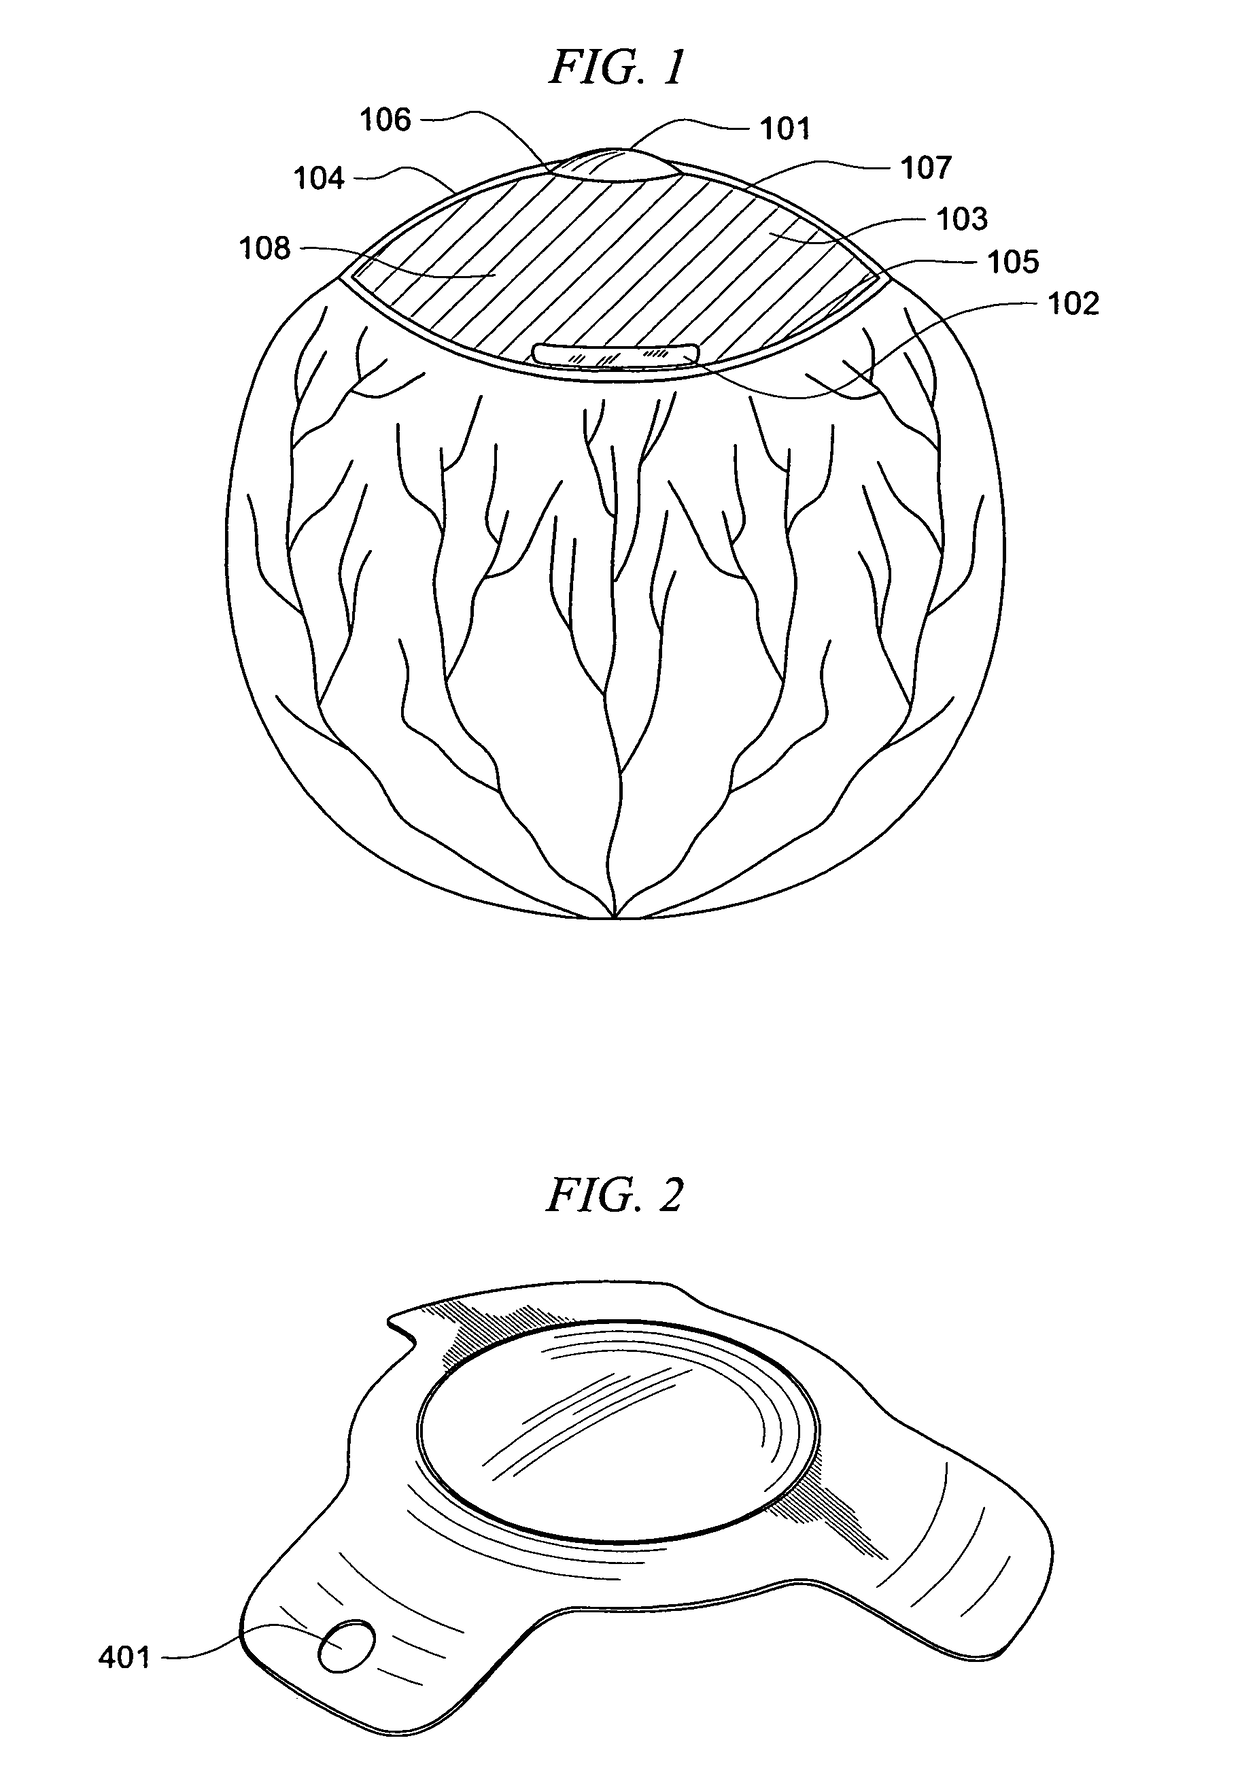 Multilens intraocular lens system with injectable accommodation material